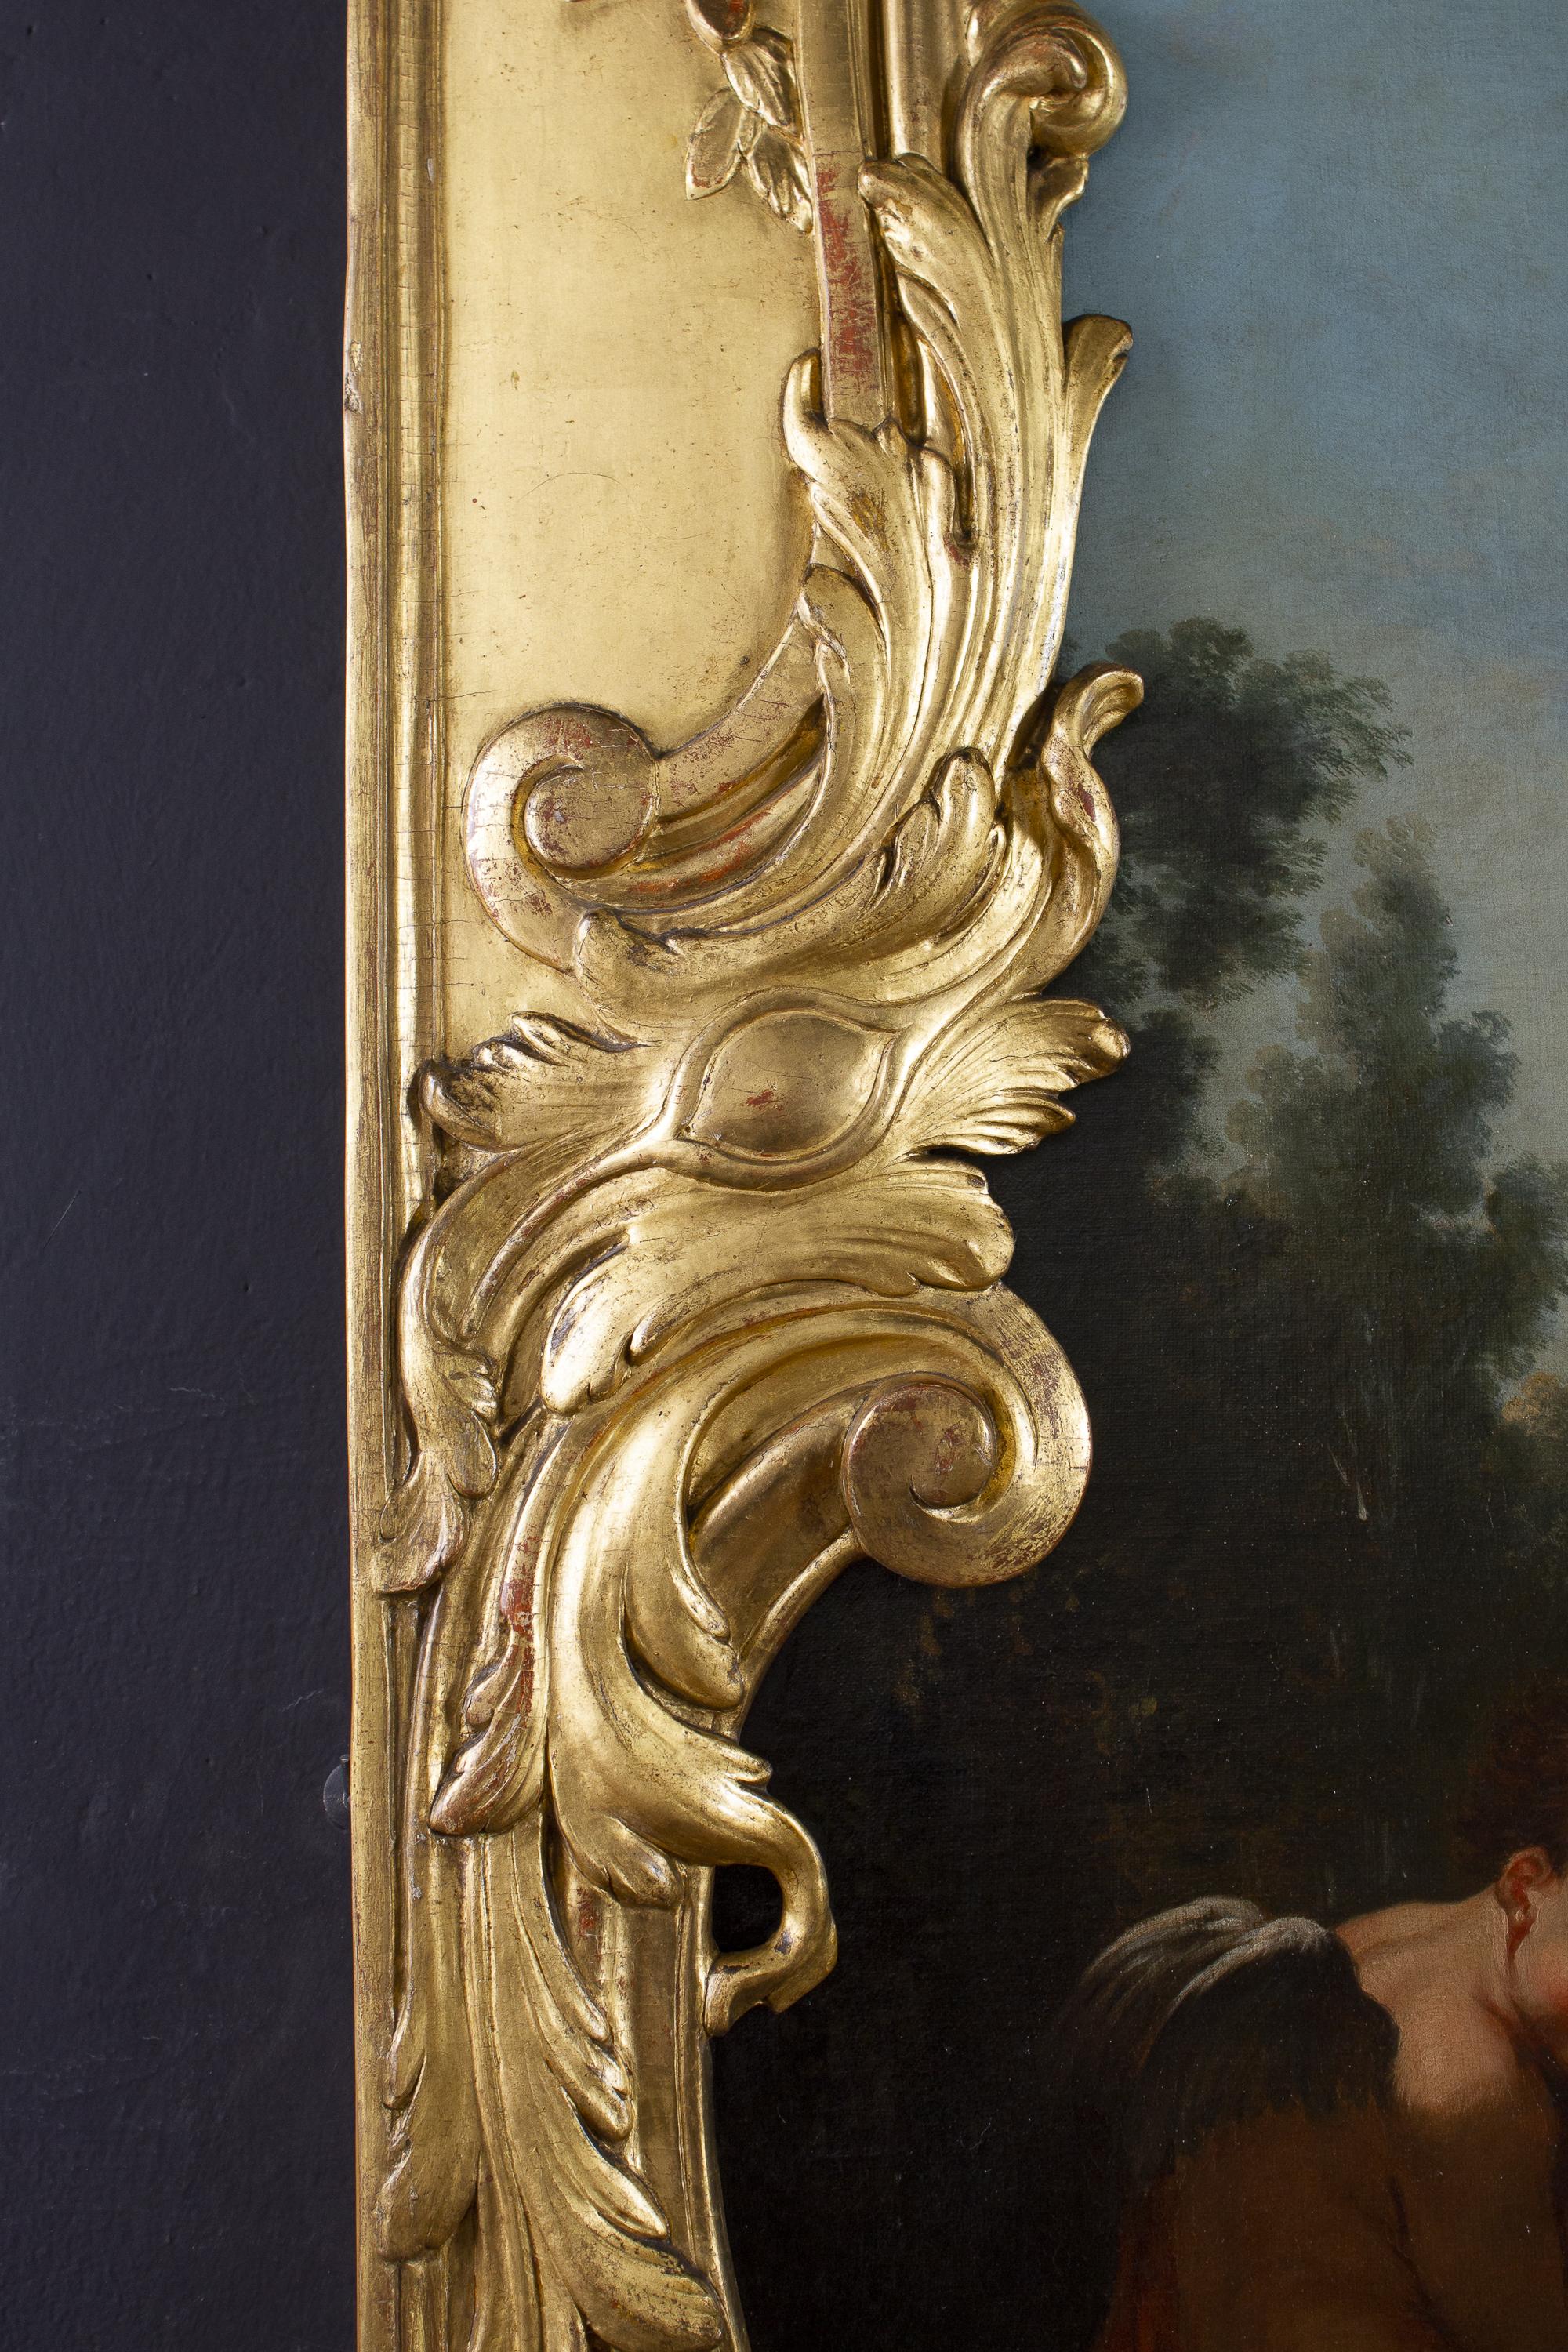 Pair of Large 18' Century French Oil Paintings after Francois Boucher For Sale 12